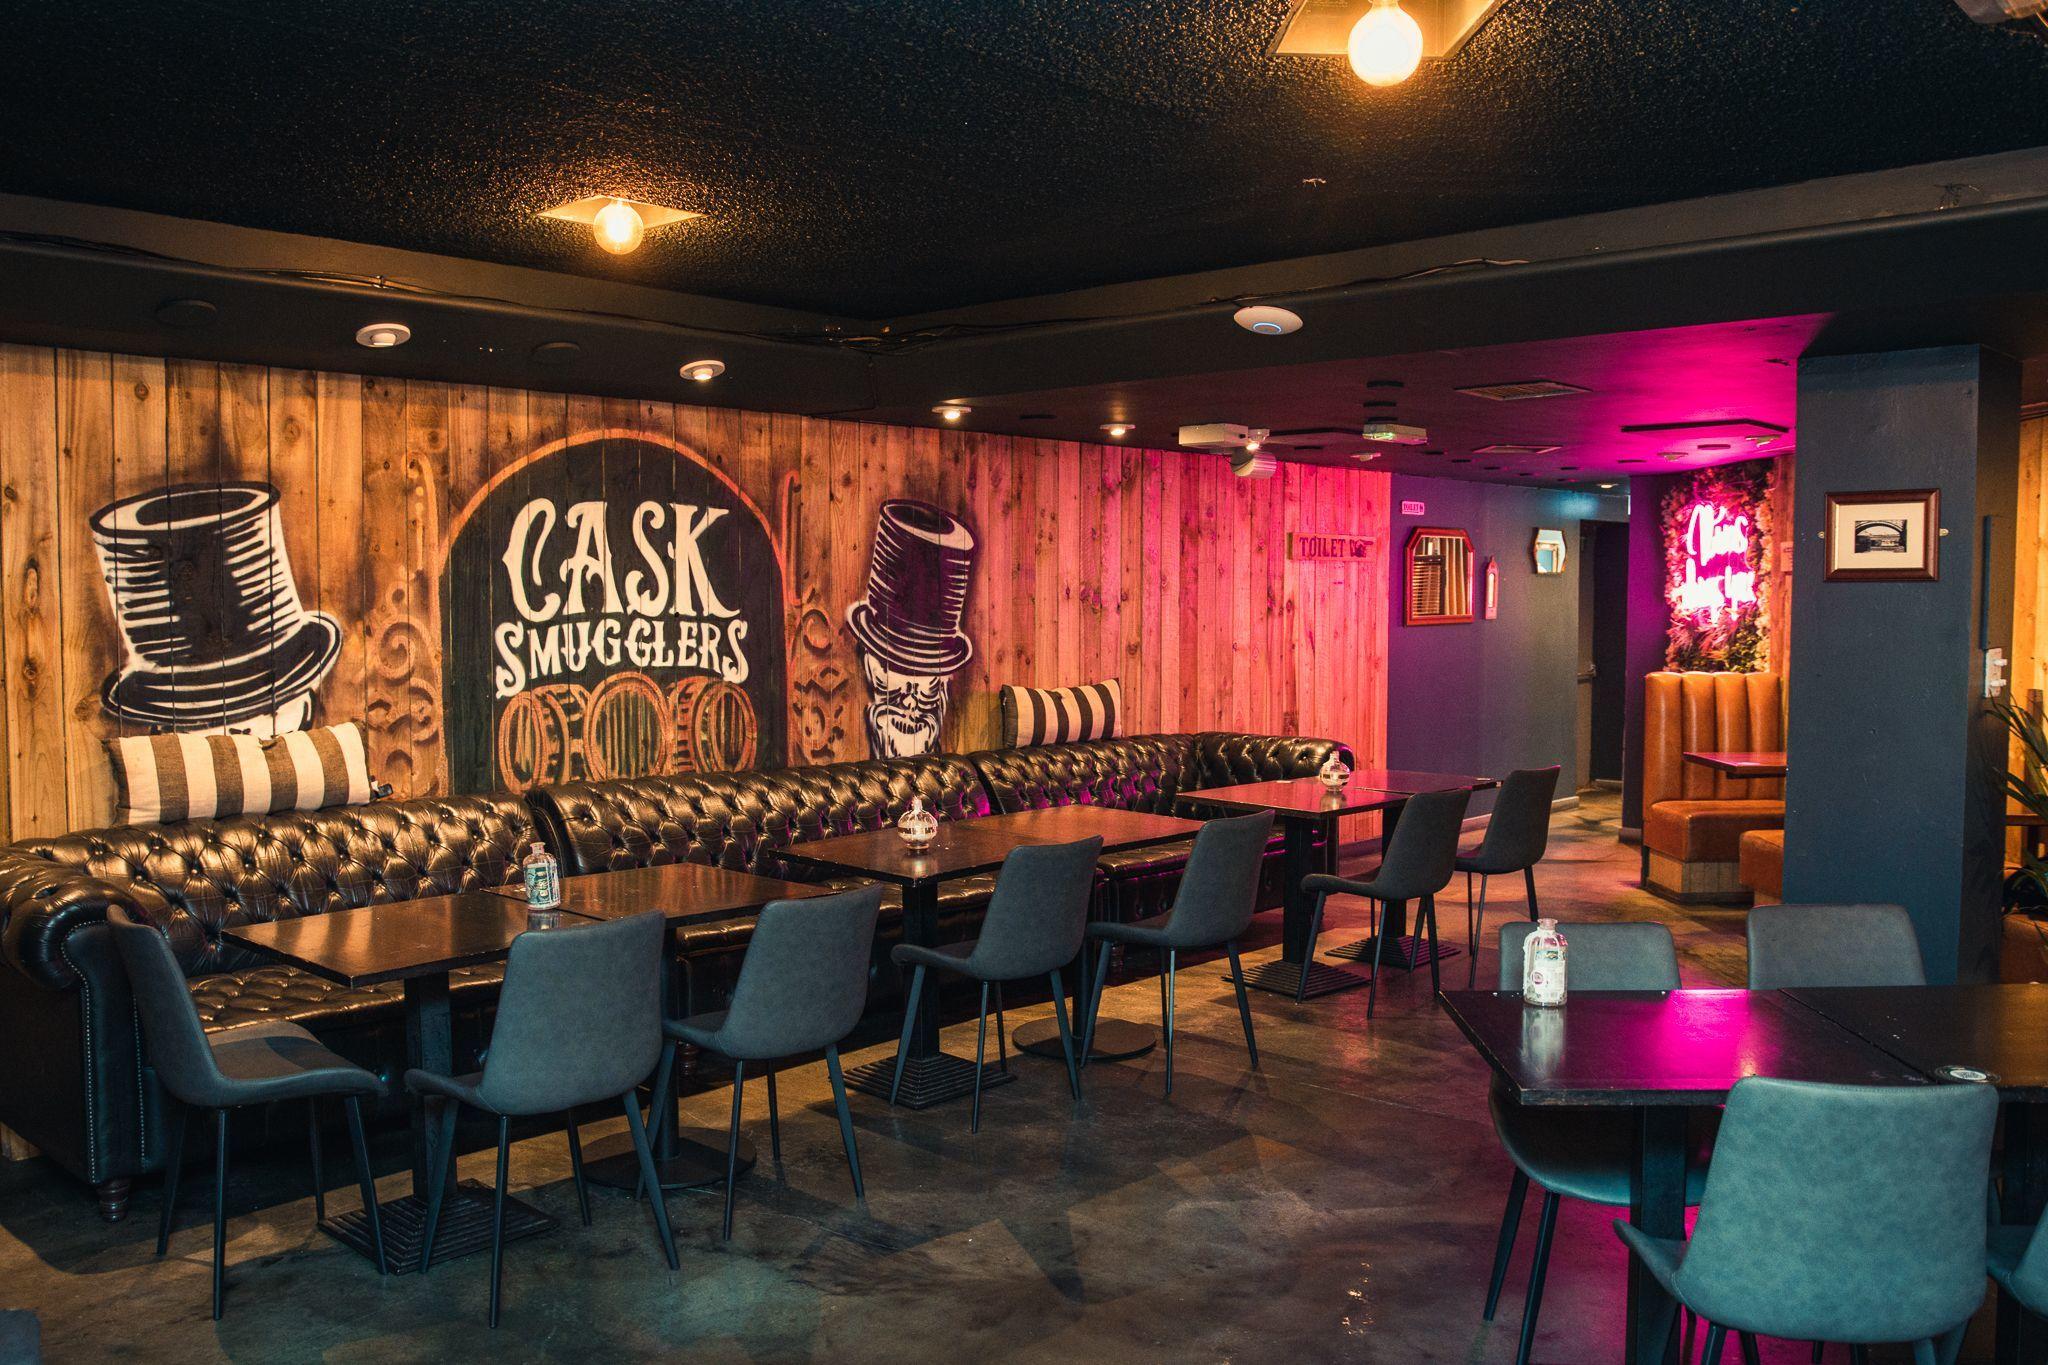 Christmas At Cask, Cask Smugglers photo #6